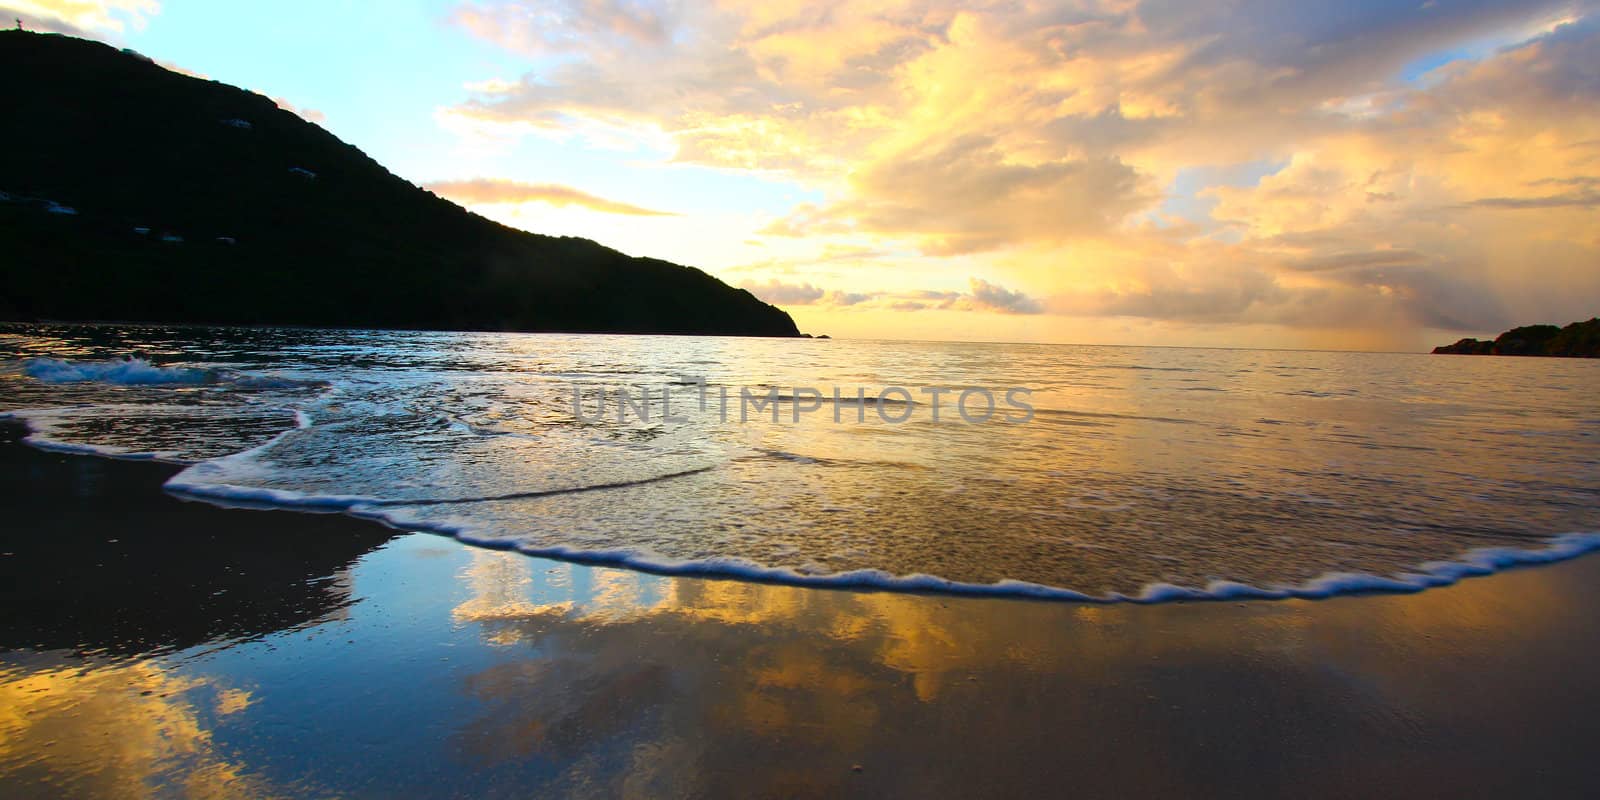 Brewers Bay of Tortola - BVI by Wirepec